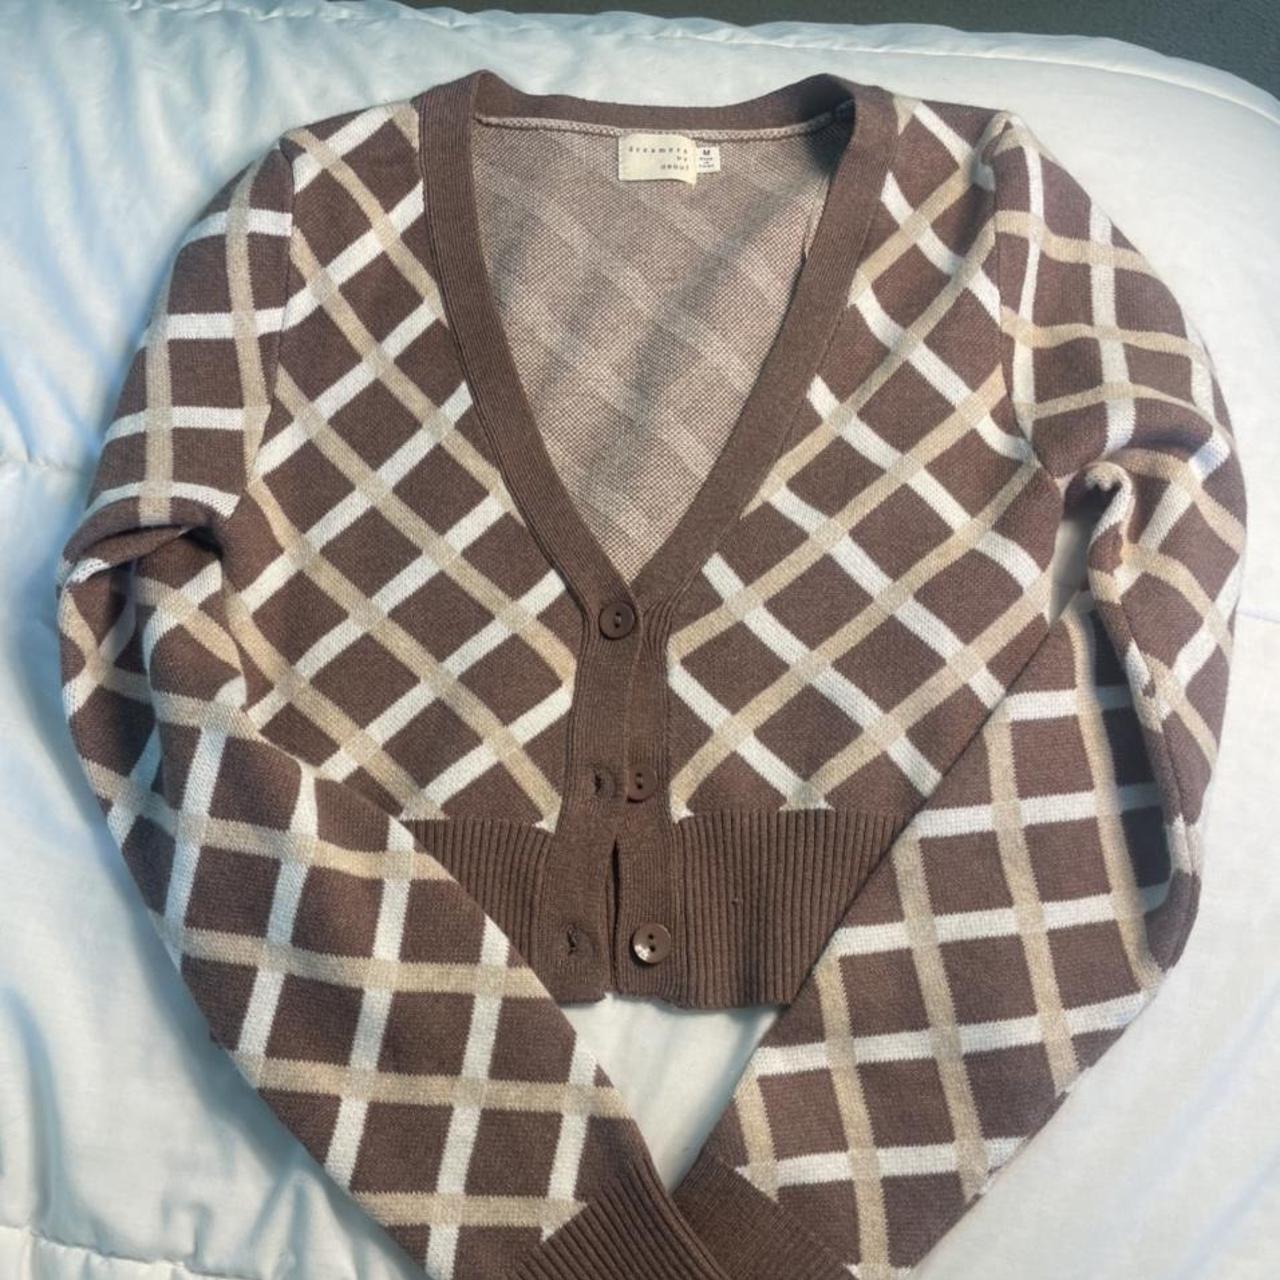 Product Image 1 - Super cute cardigan!
Brown with the